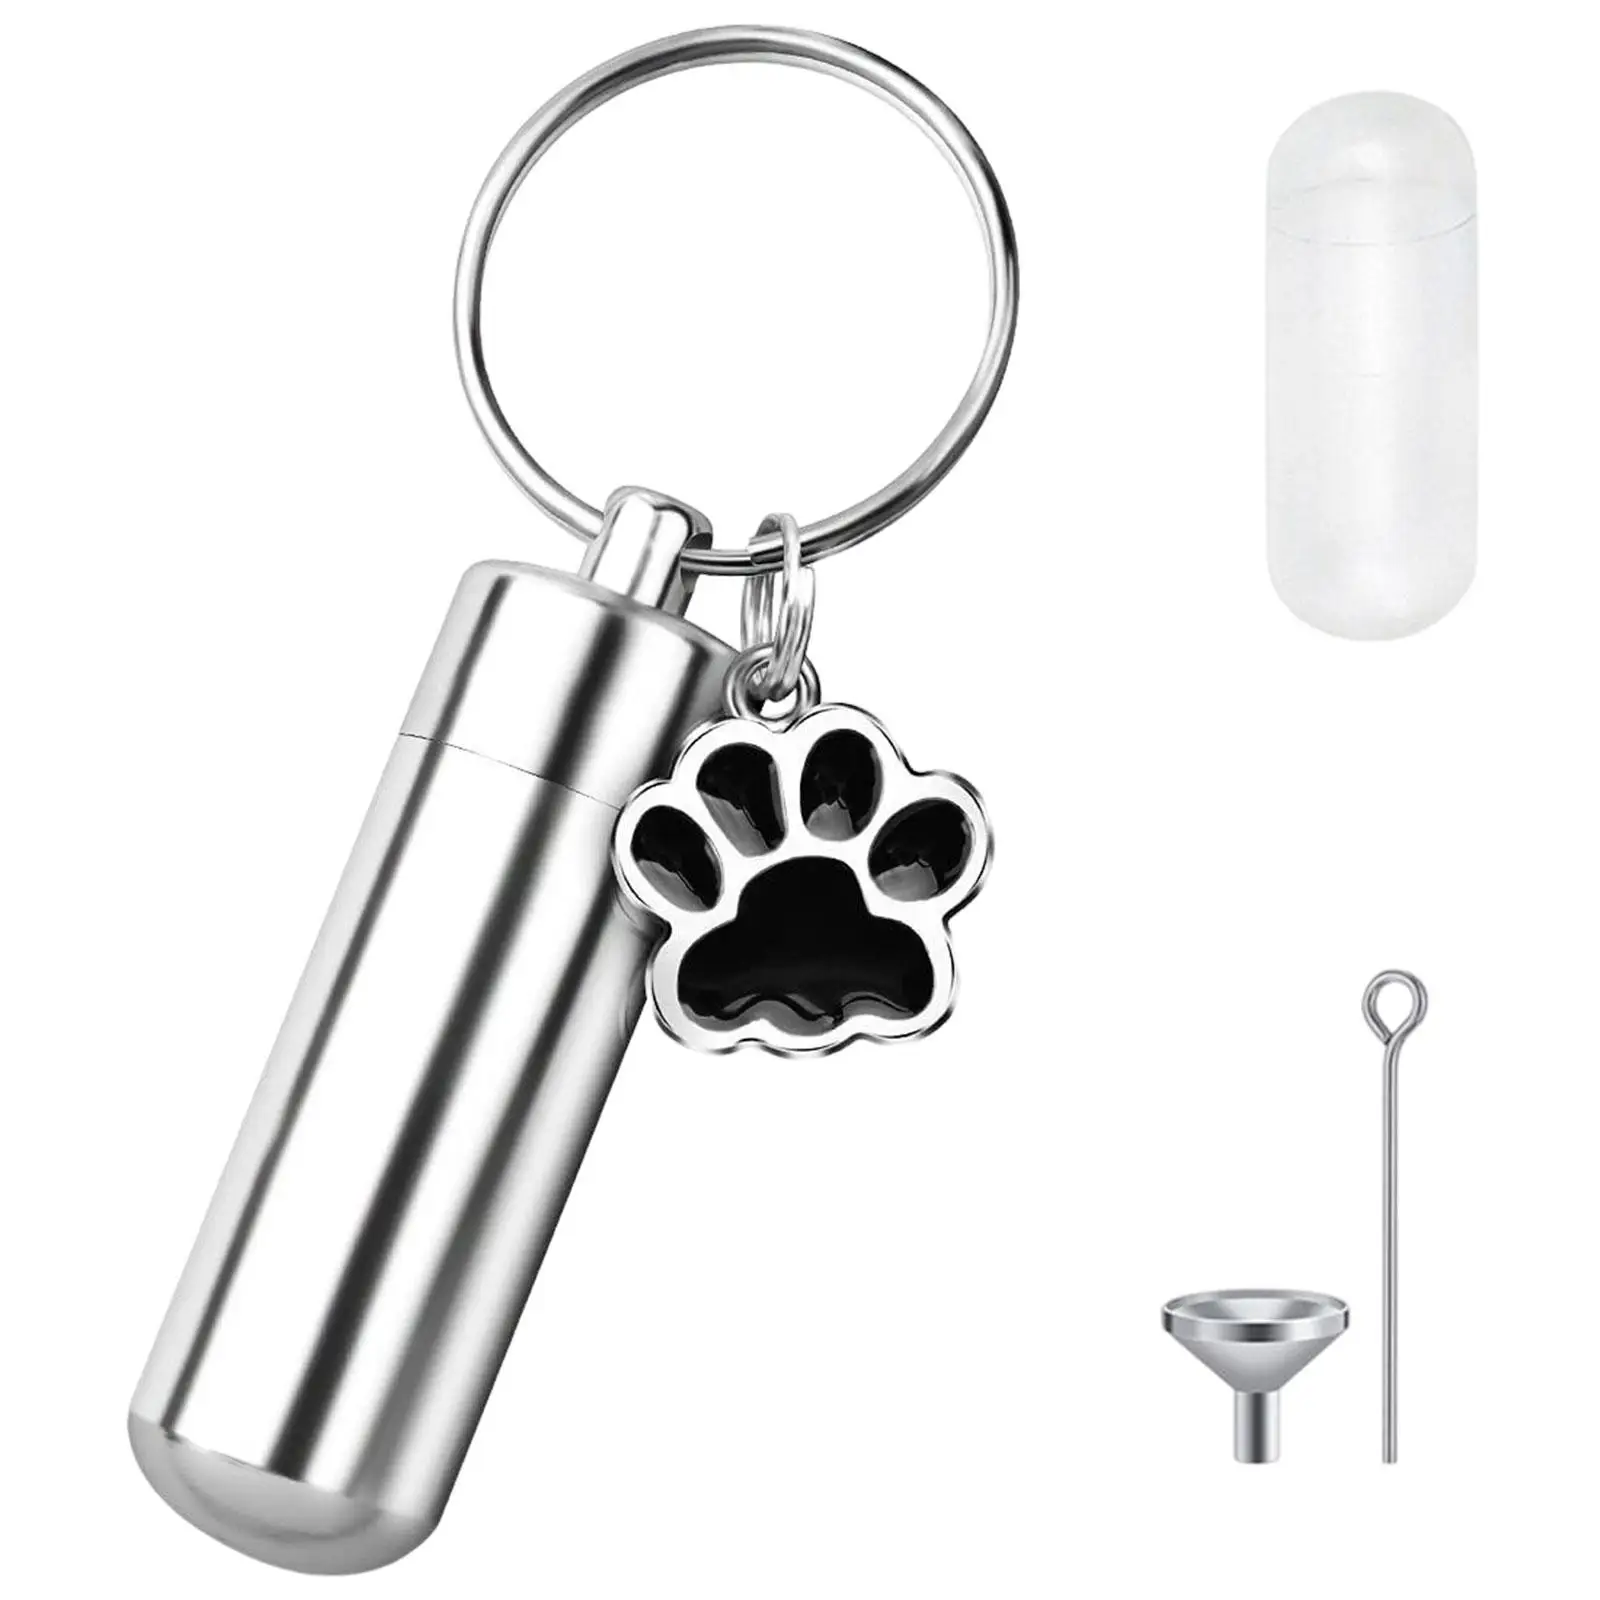 Stainless Steel Pet Urns Keepsake Pendant Key Rings Memorial Jewelry Bottle Remembrance Sympathy Cremation Urn Keychain